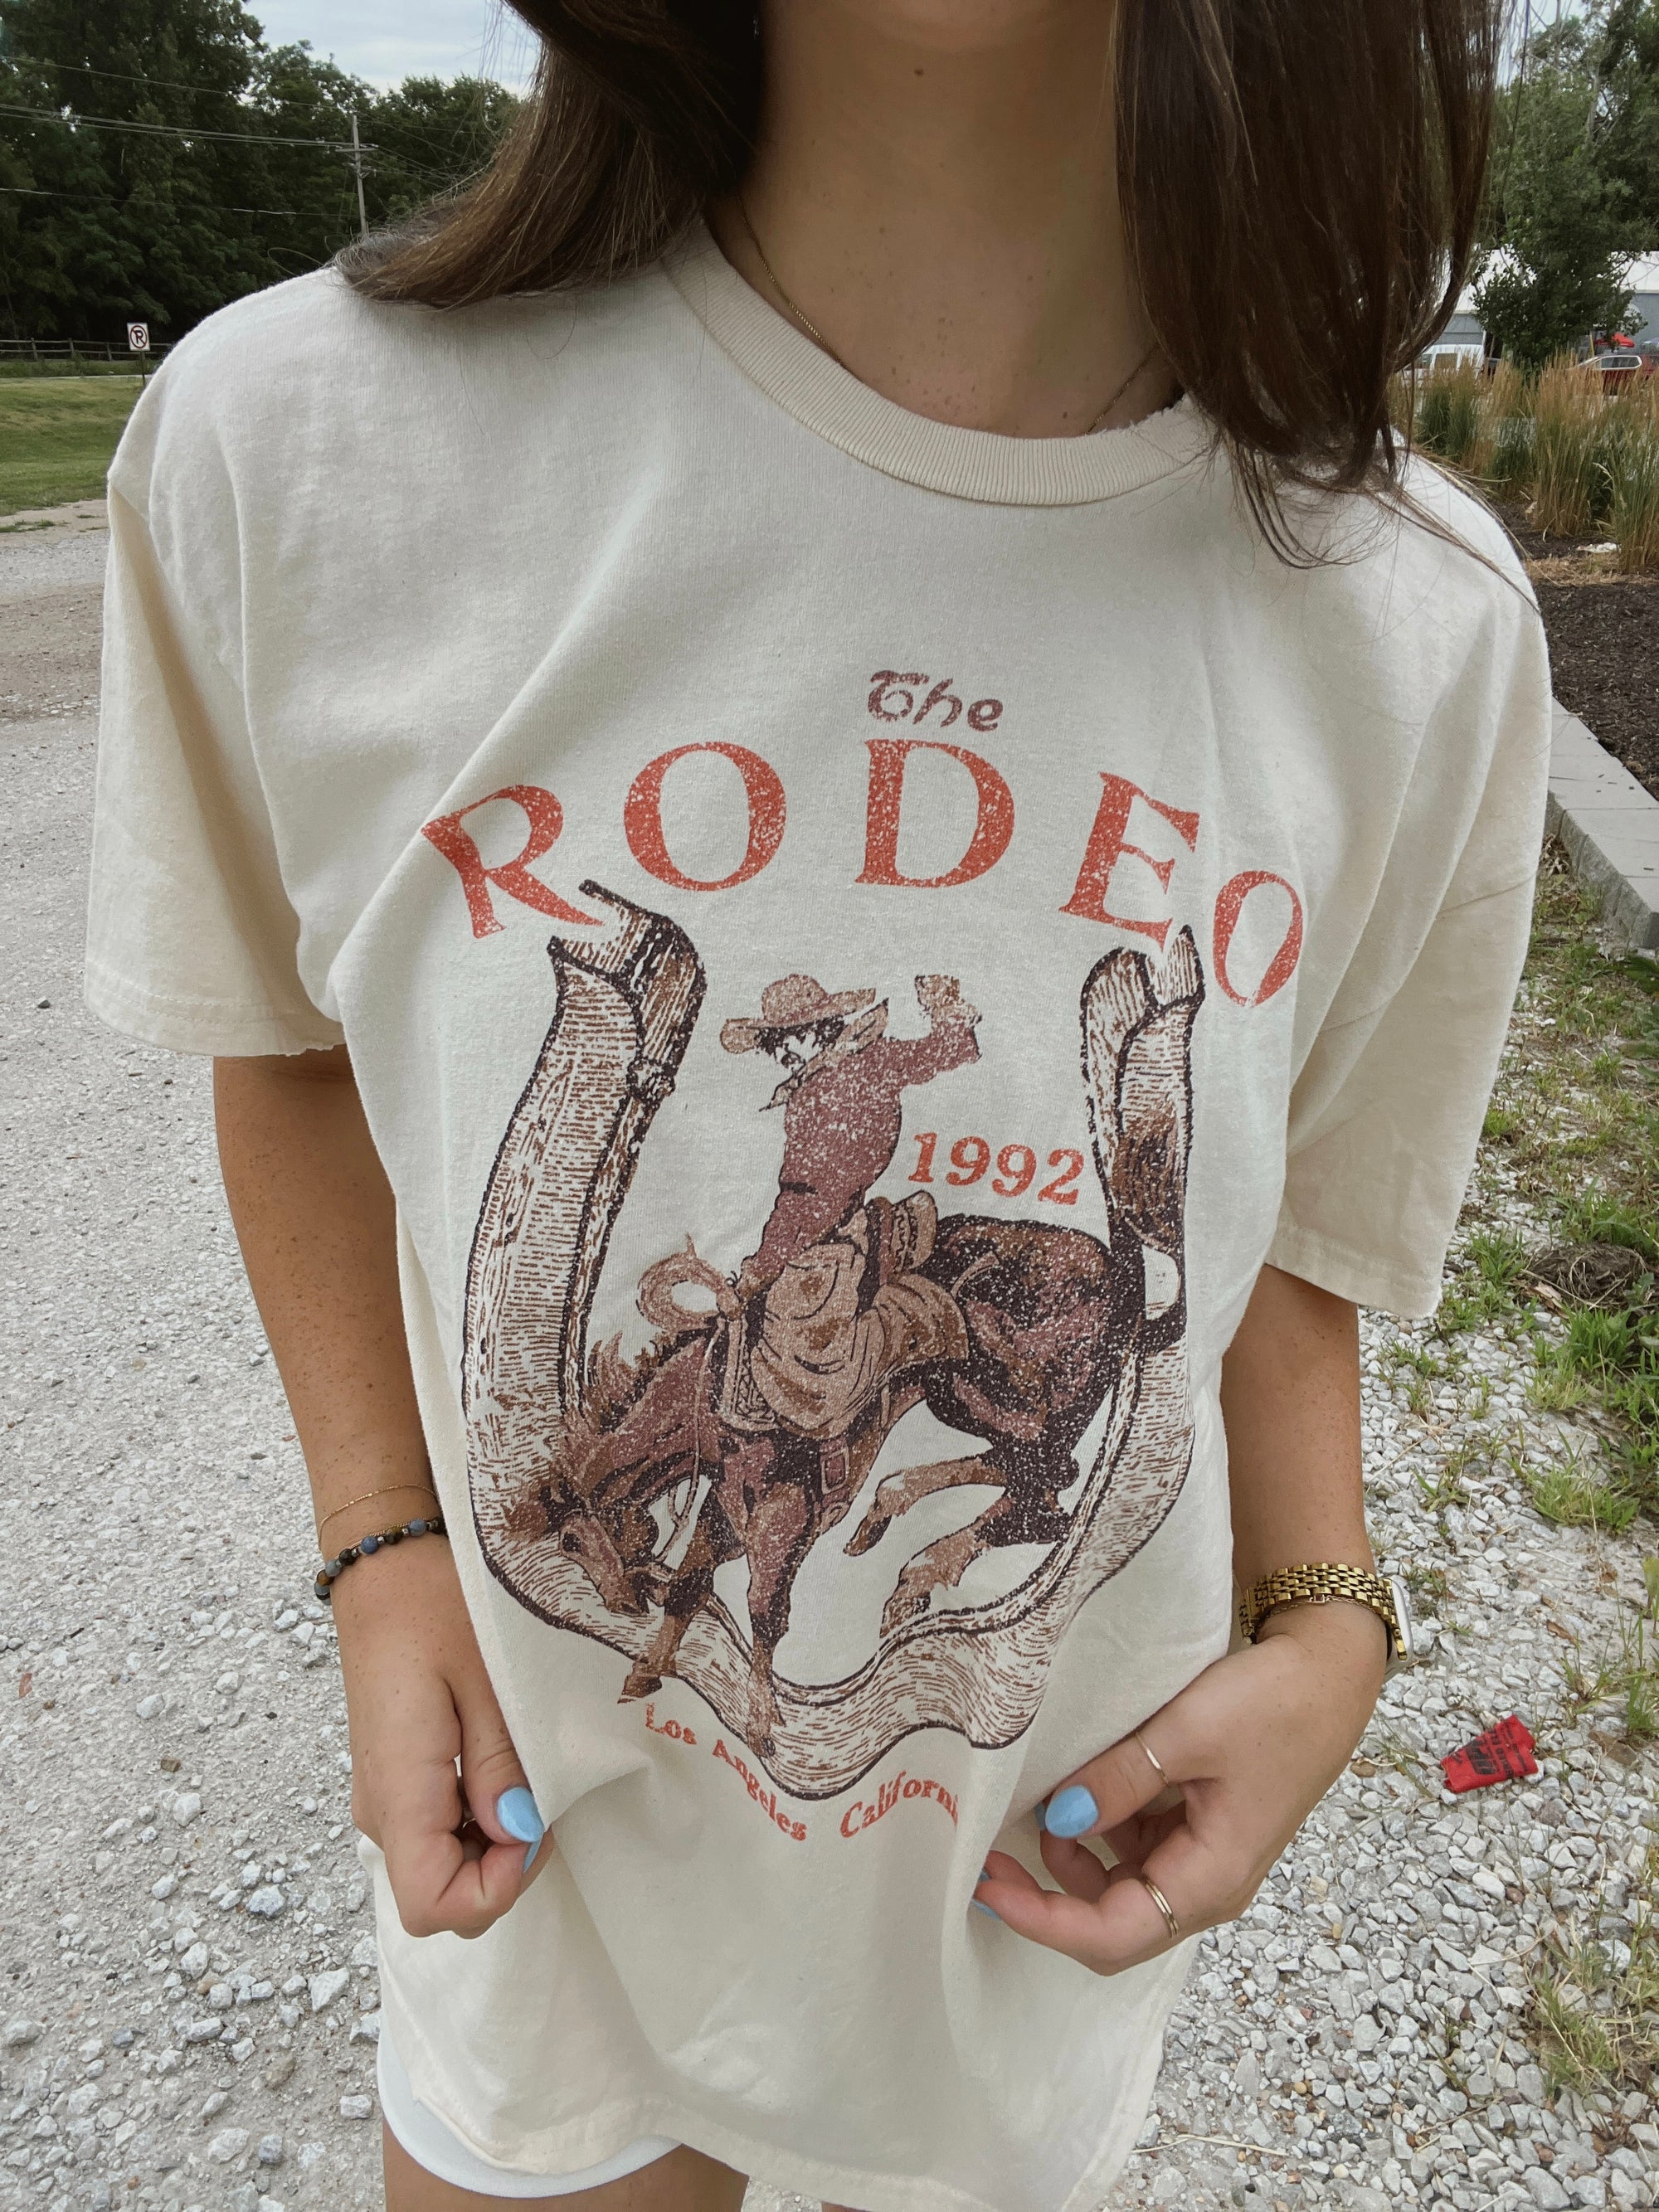 The Rodeo Graphic Tee